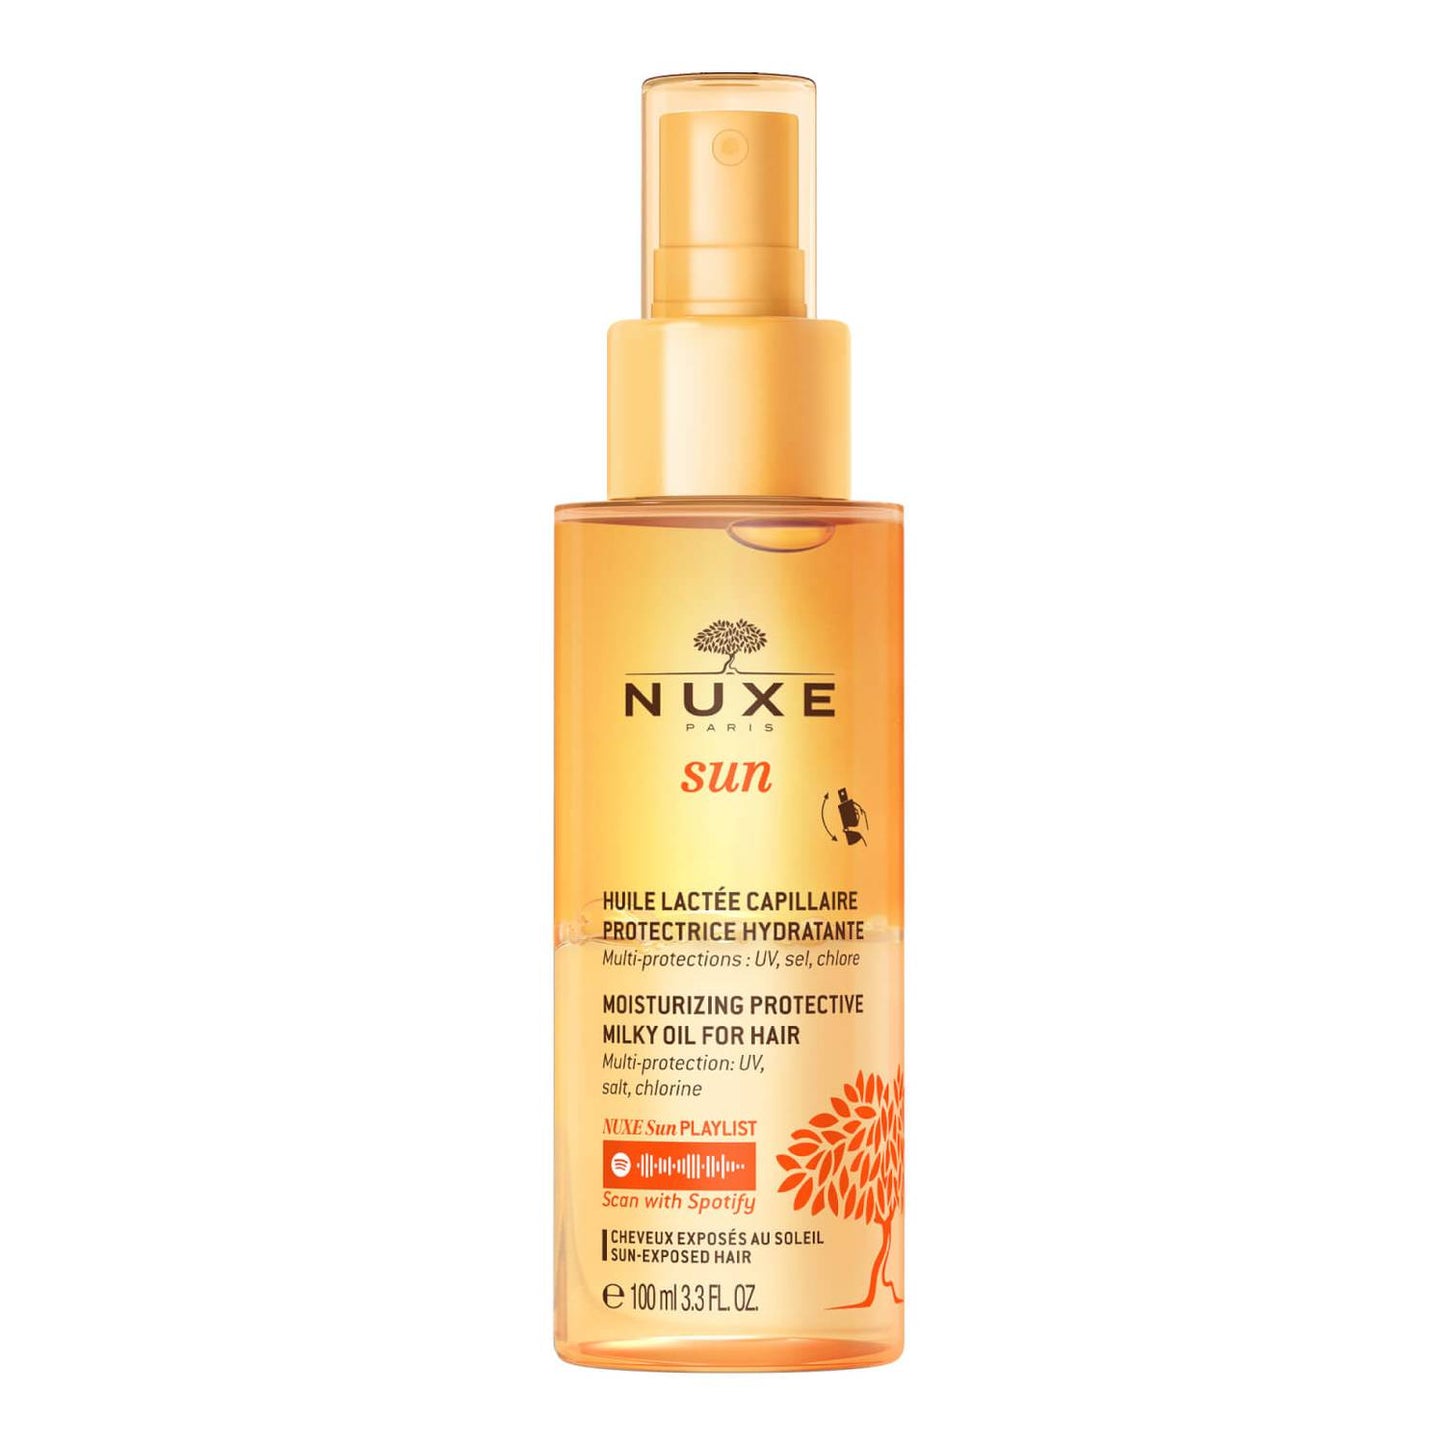 if you are looking for a hair product to make your hair look stylised after the beach or pool this is Nuxe Sun Moisturising Protective Milky Oil.